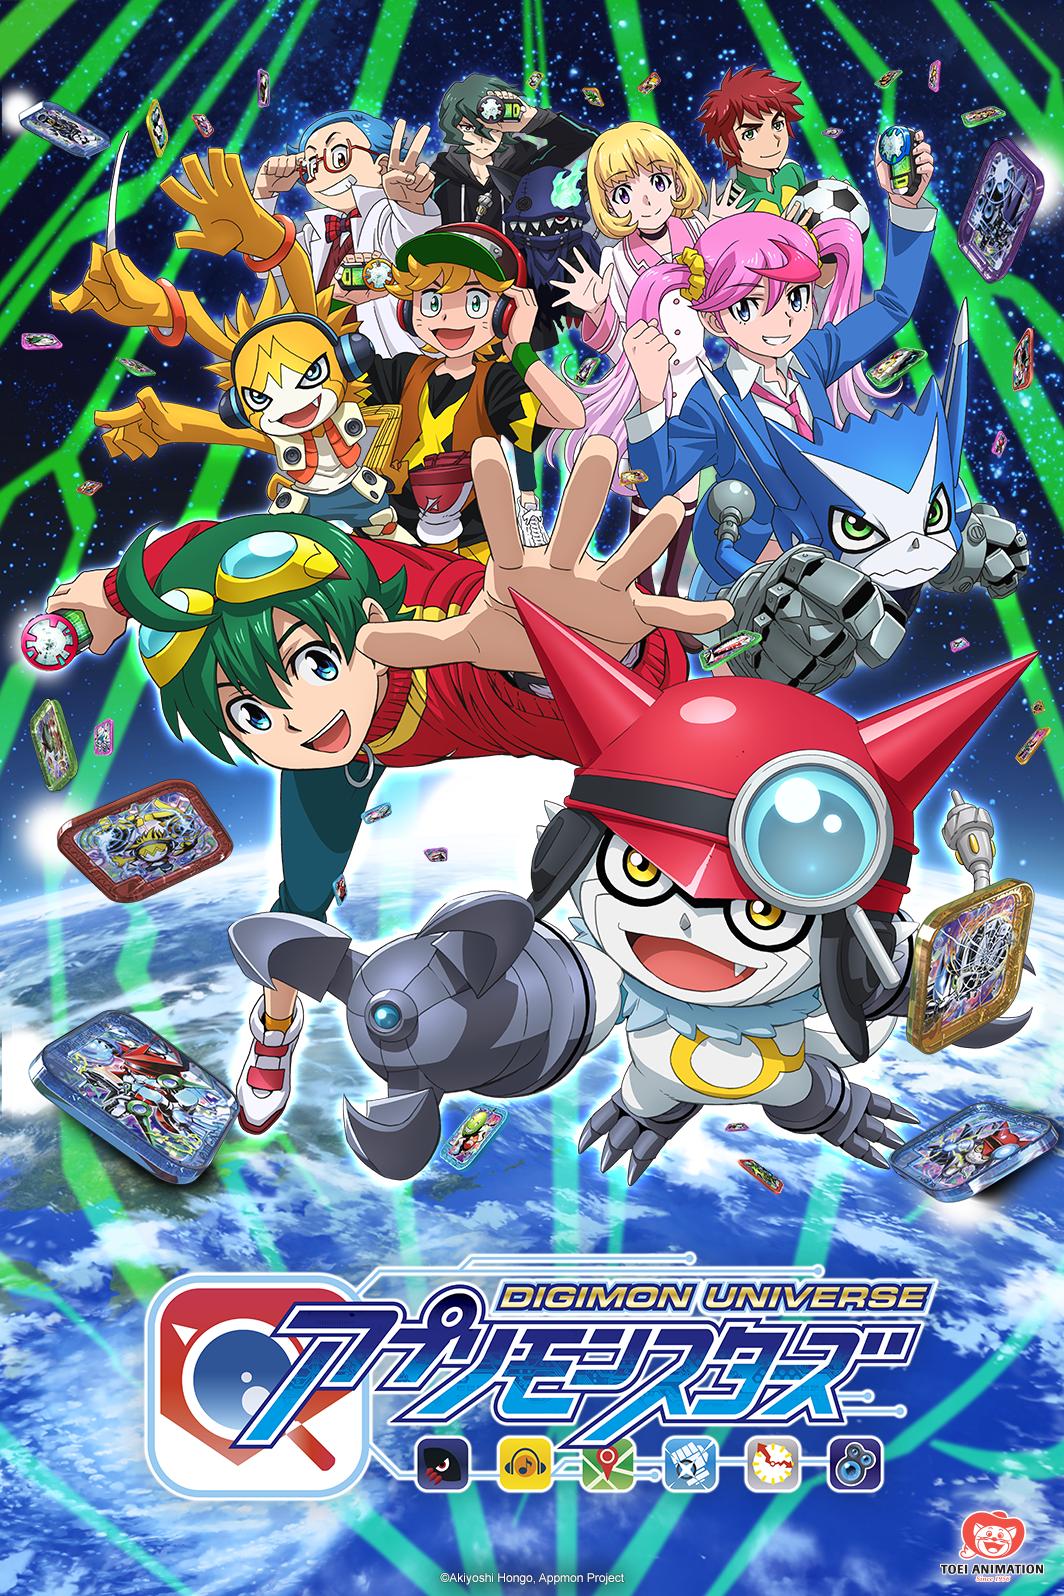 Digimon universe app monsters characters